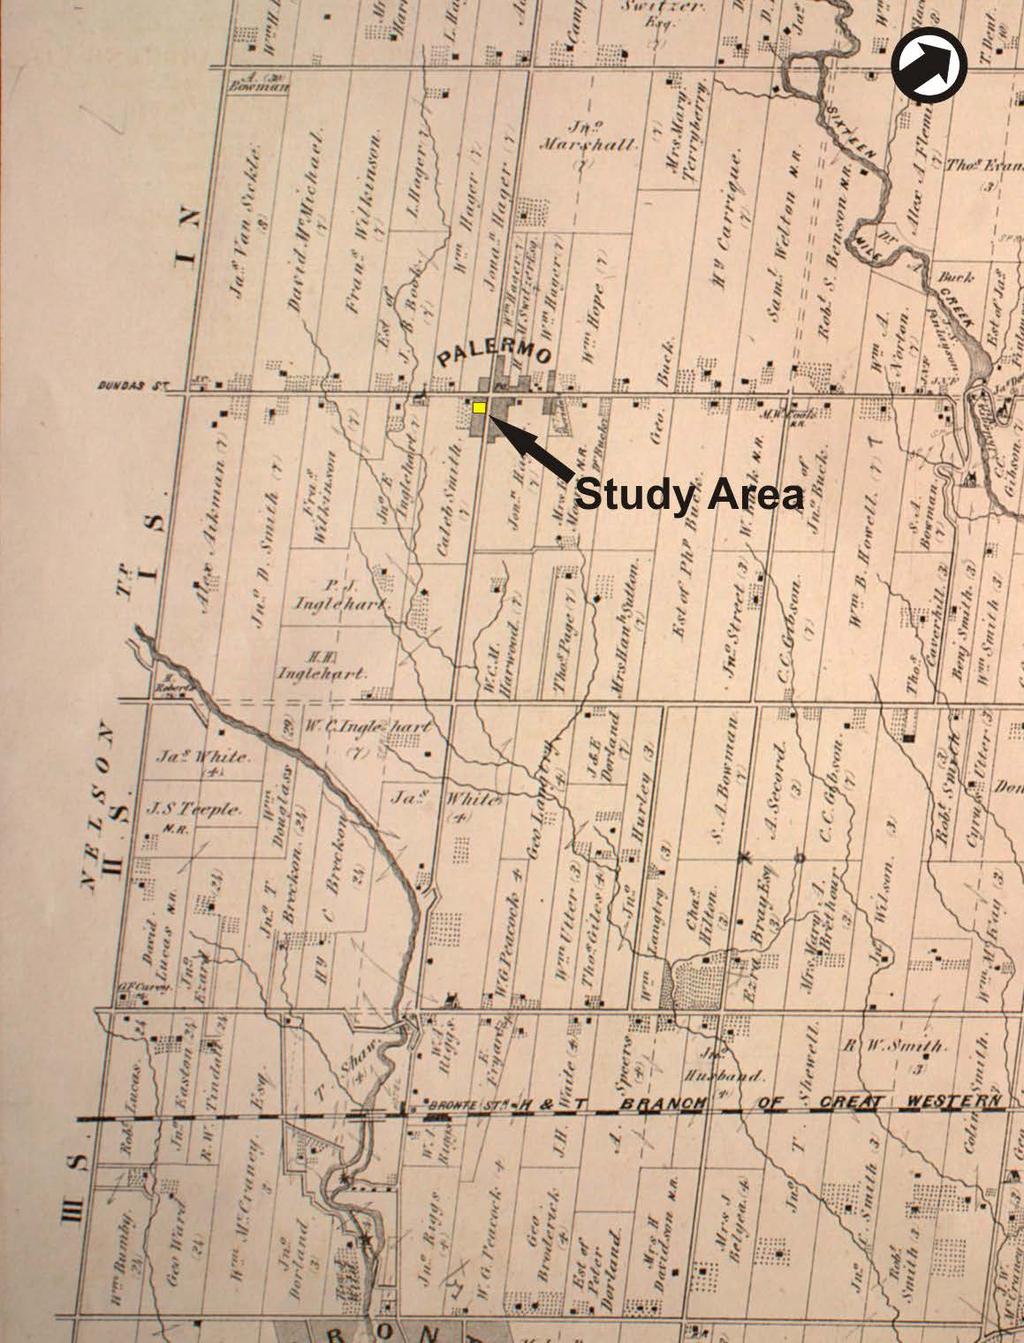 New Directions Archaeology Ltd 10 Figure 2: Location of the study area